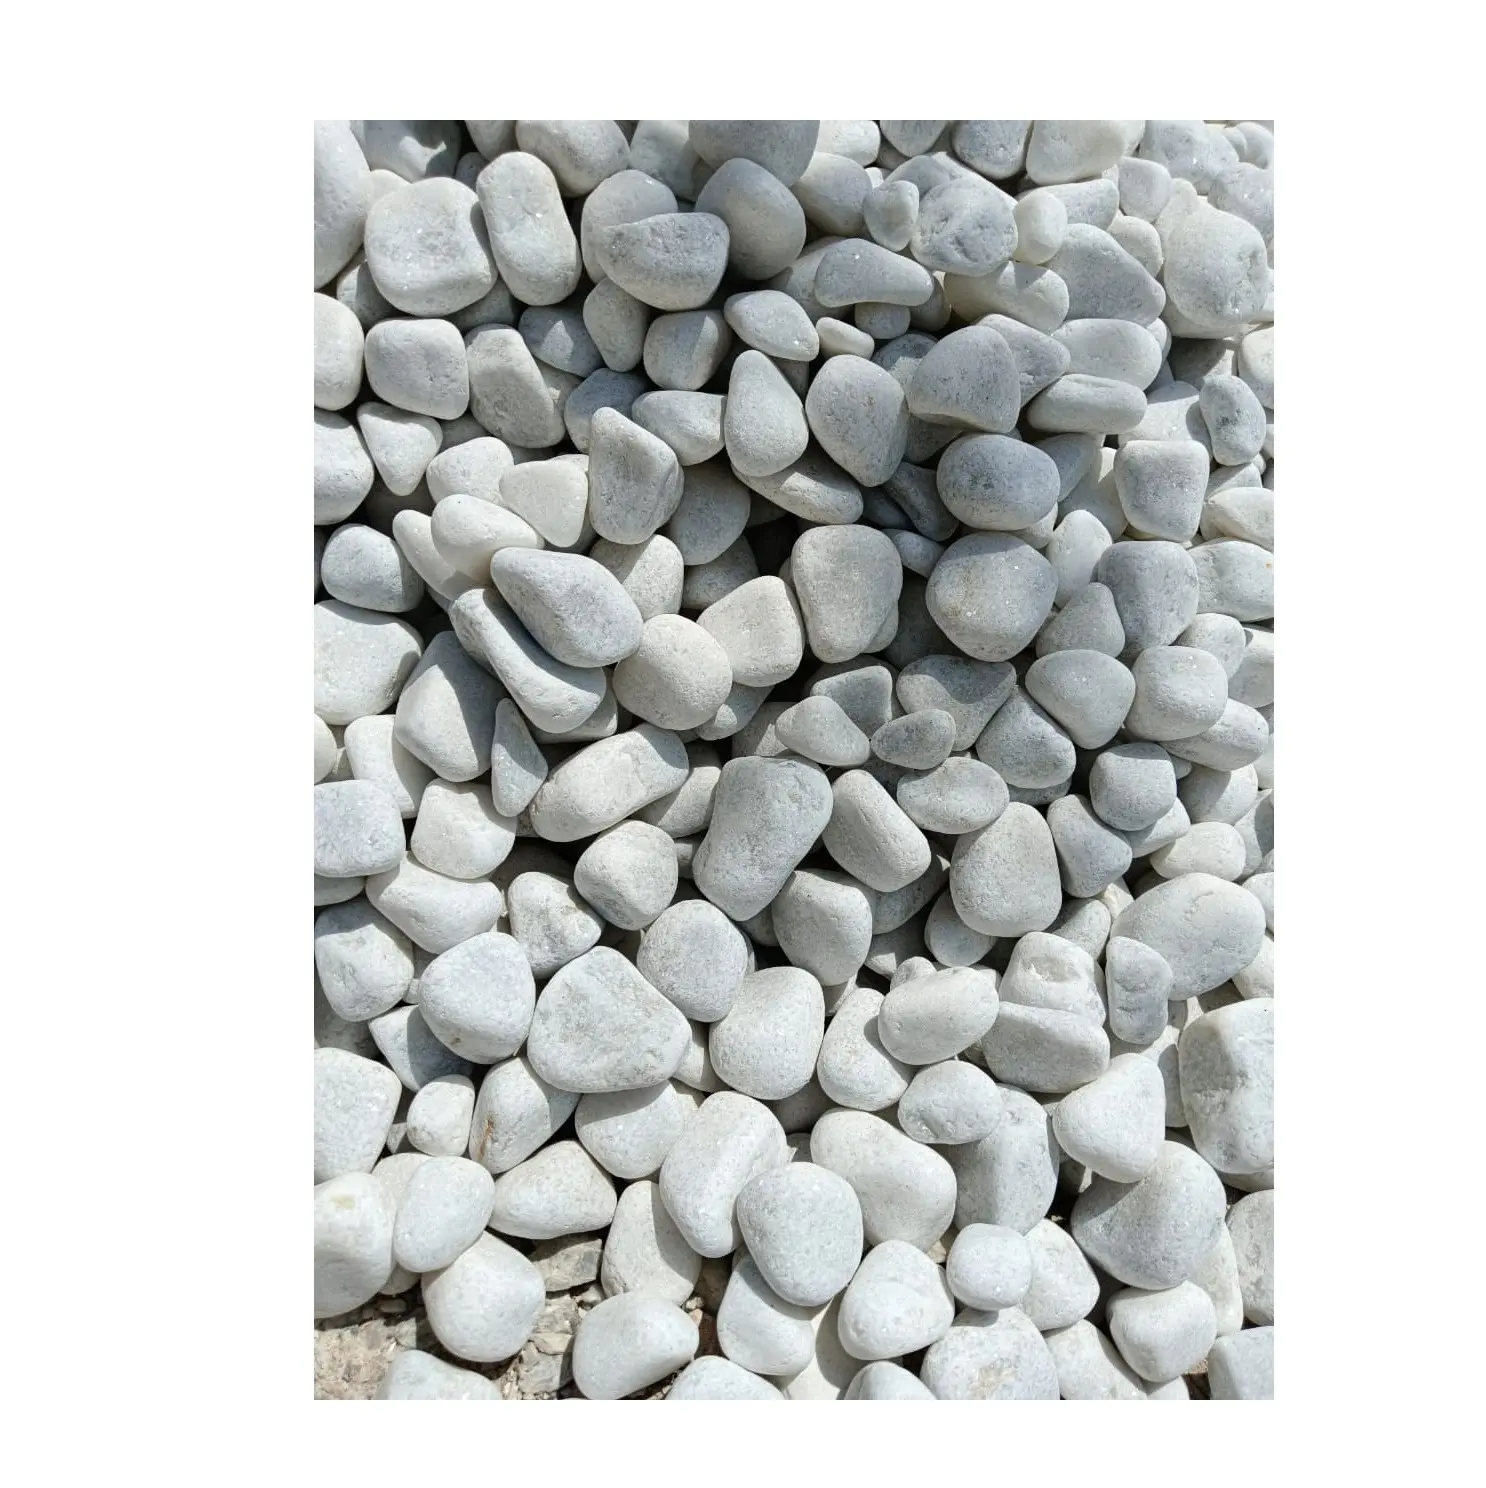 Direct Factory Supply Natural Stone Marble Pebbles for Garden and Temple Decoration Available at Export Price